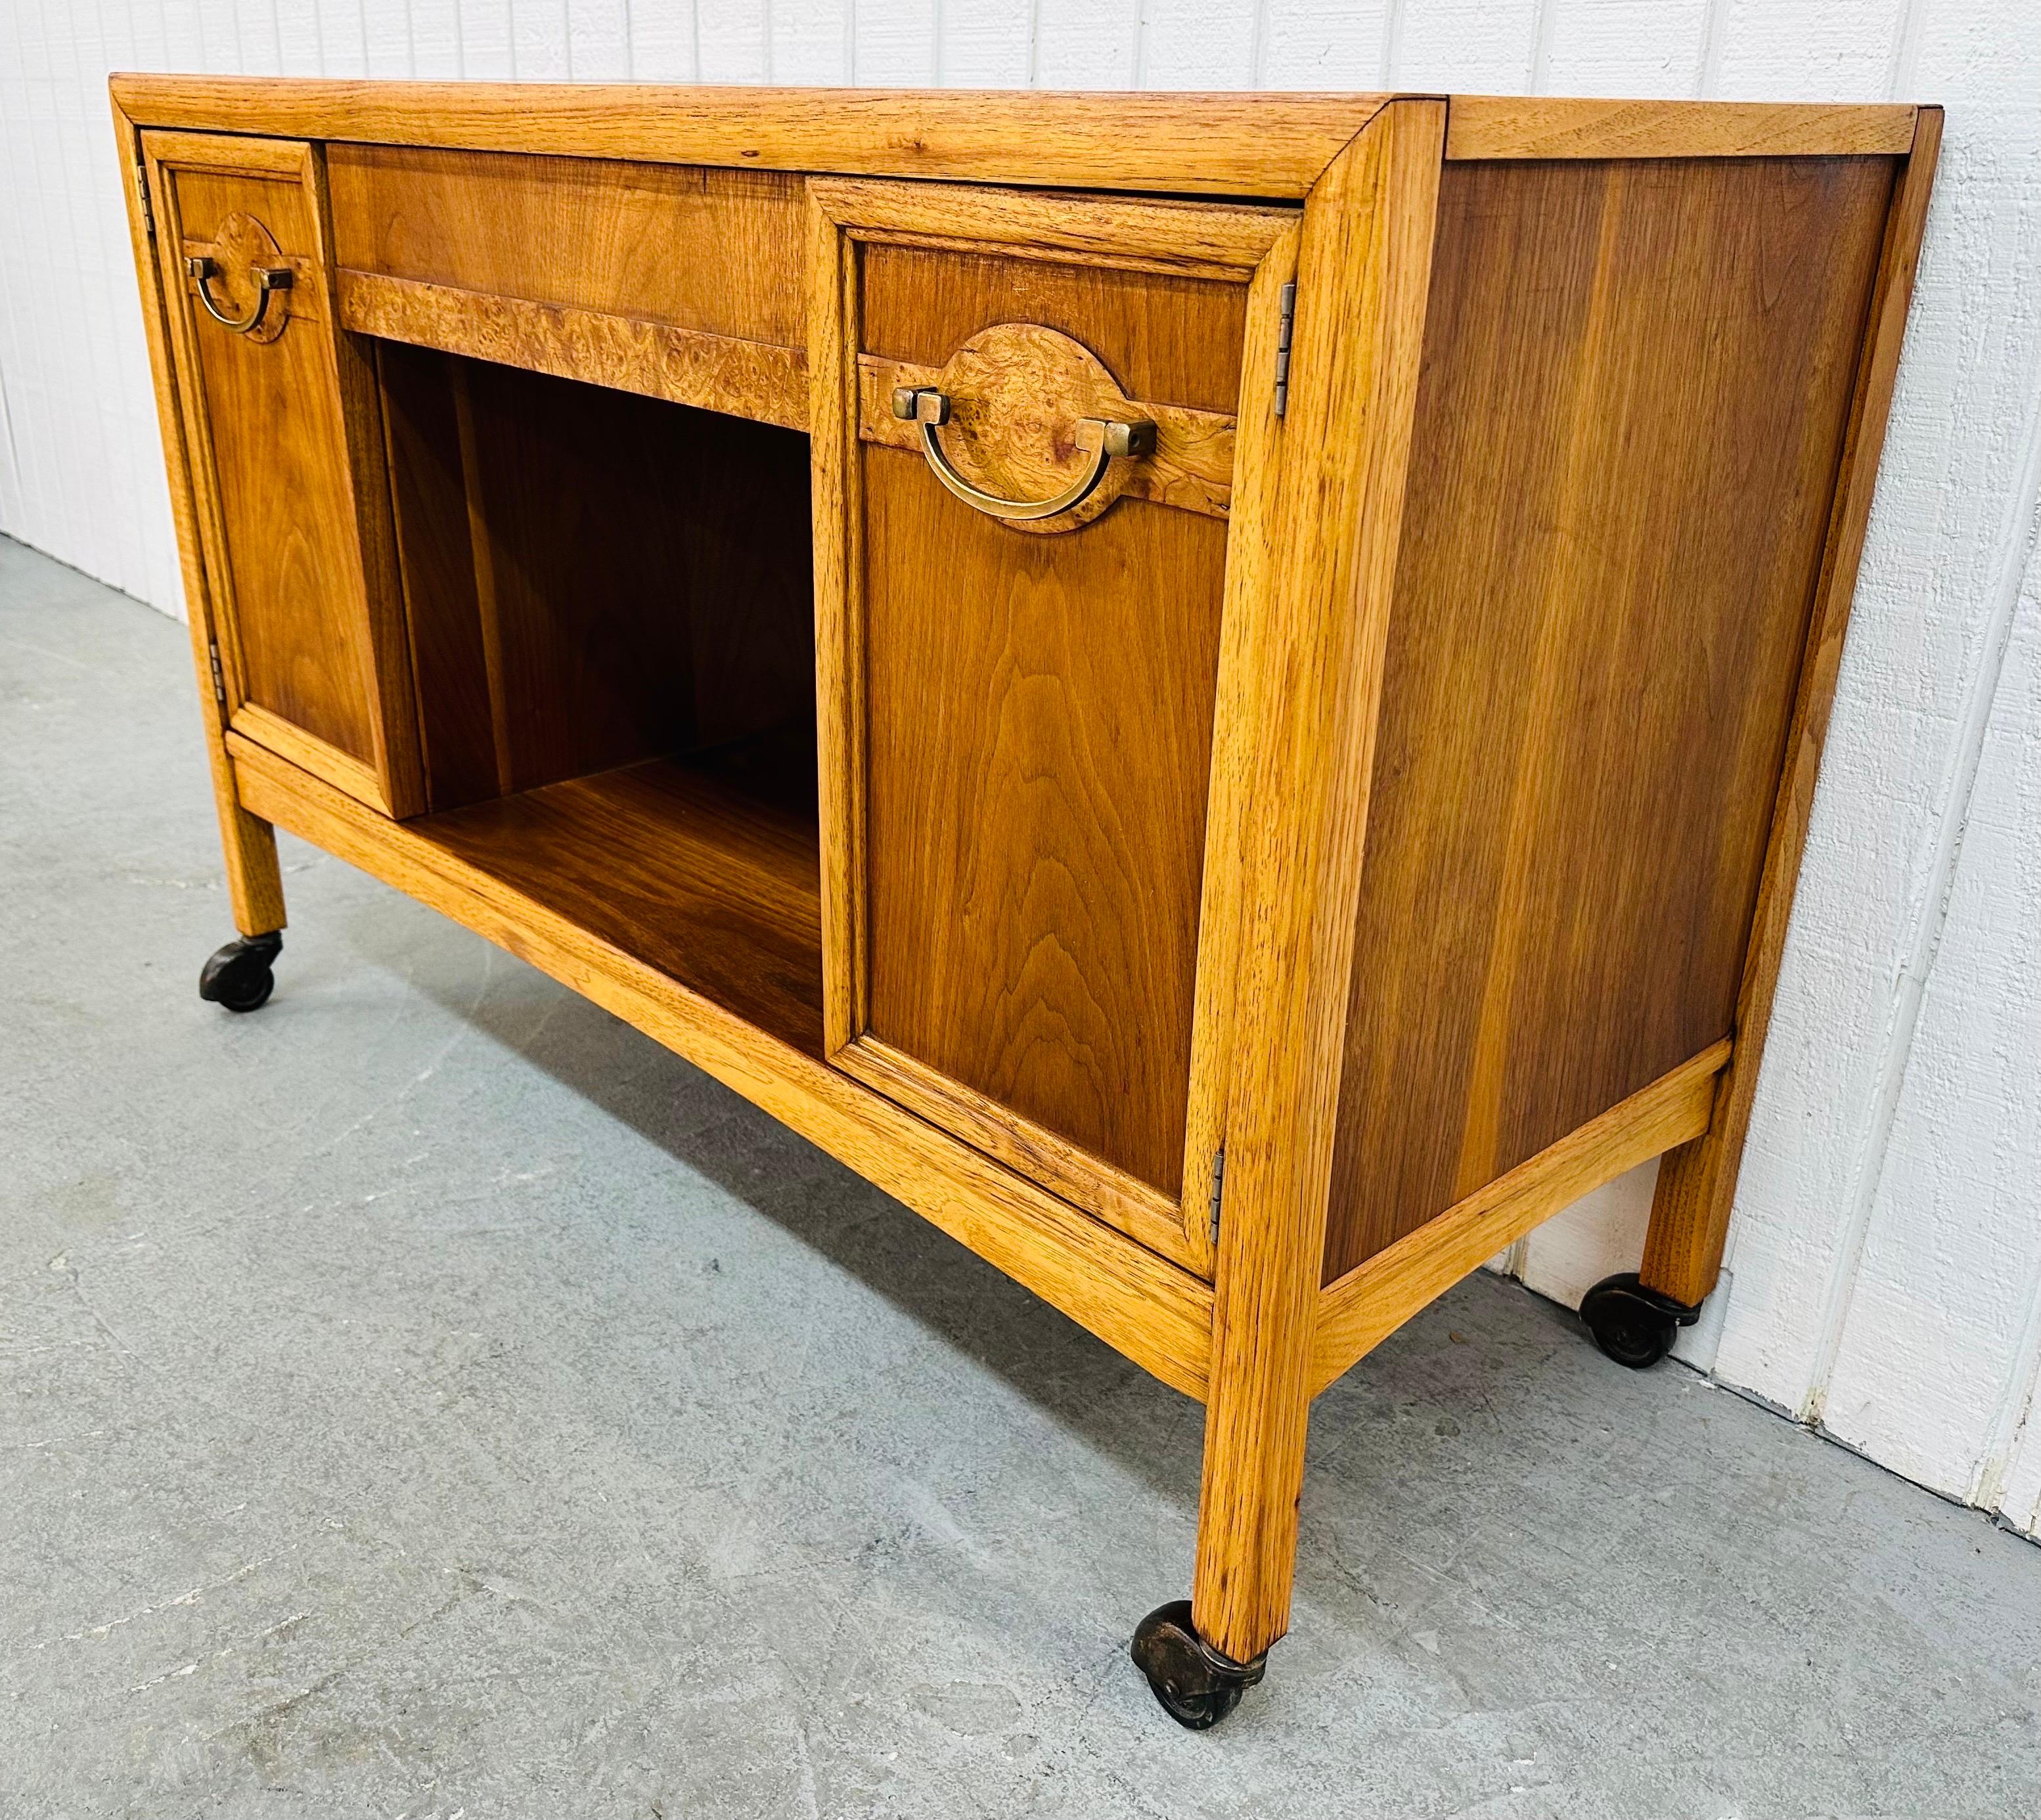 This listing is for a vintage Drexel Walnut Serving Cart. Featuring a straight line design, rectangular top, center drawer, two doors that open up to storage space, open space under the drawer for more storage, original hardware, wheels for easy